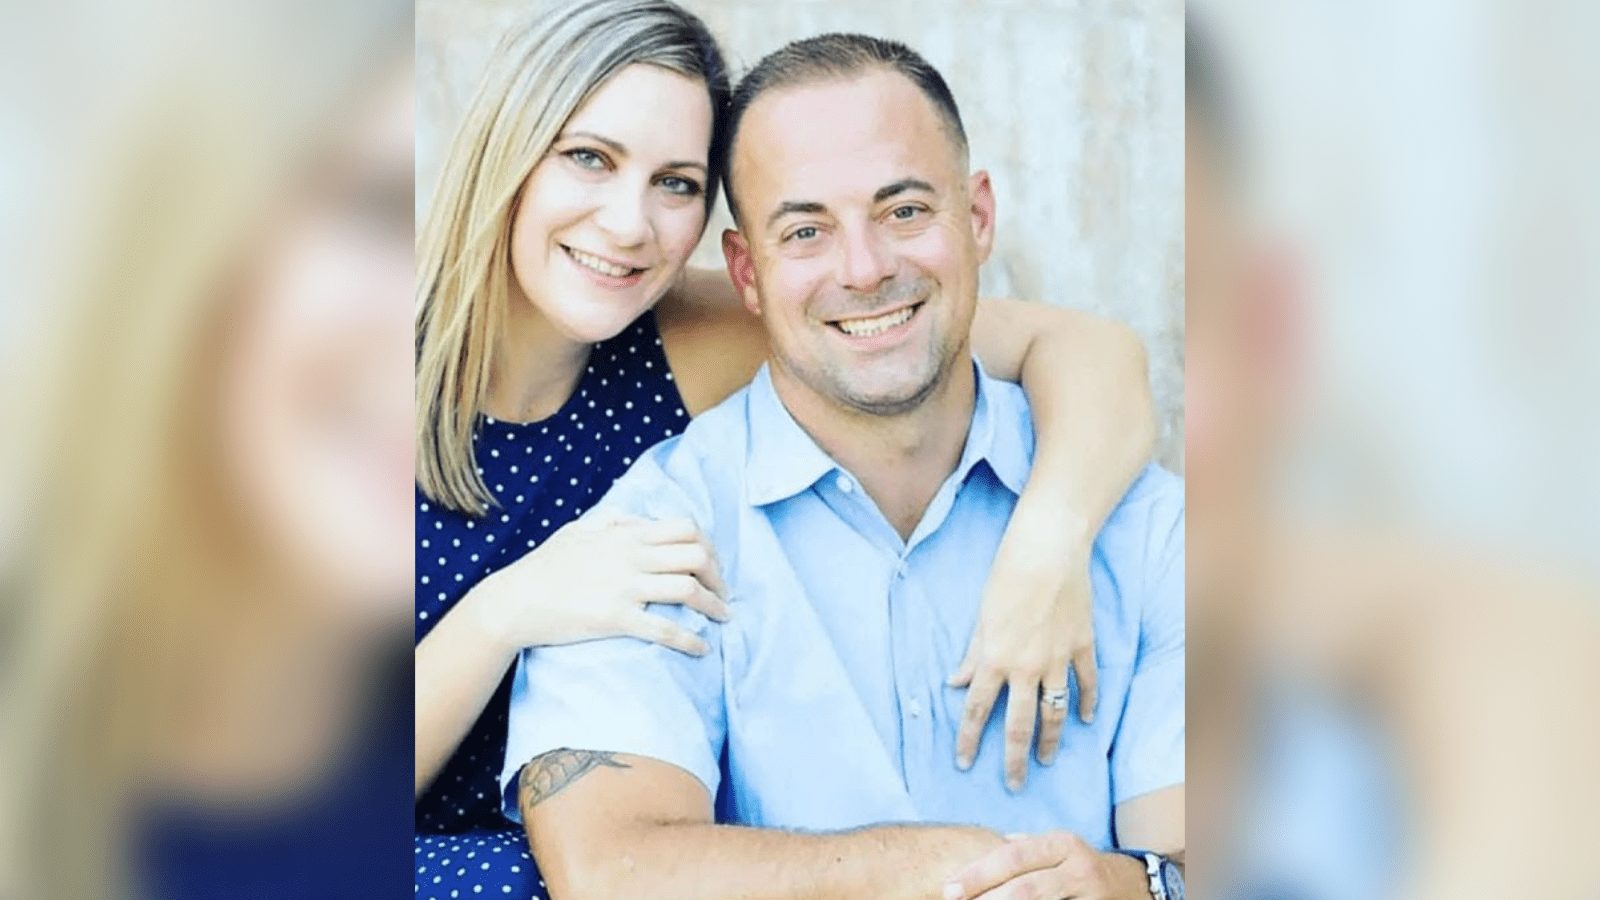 DFW Firefighter's Widow Sues Travel Agency Over Husband's Death